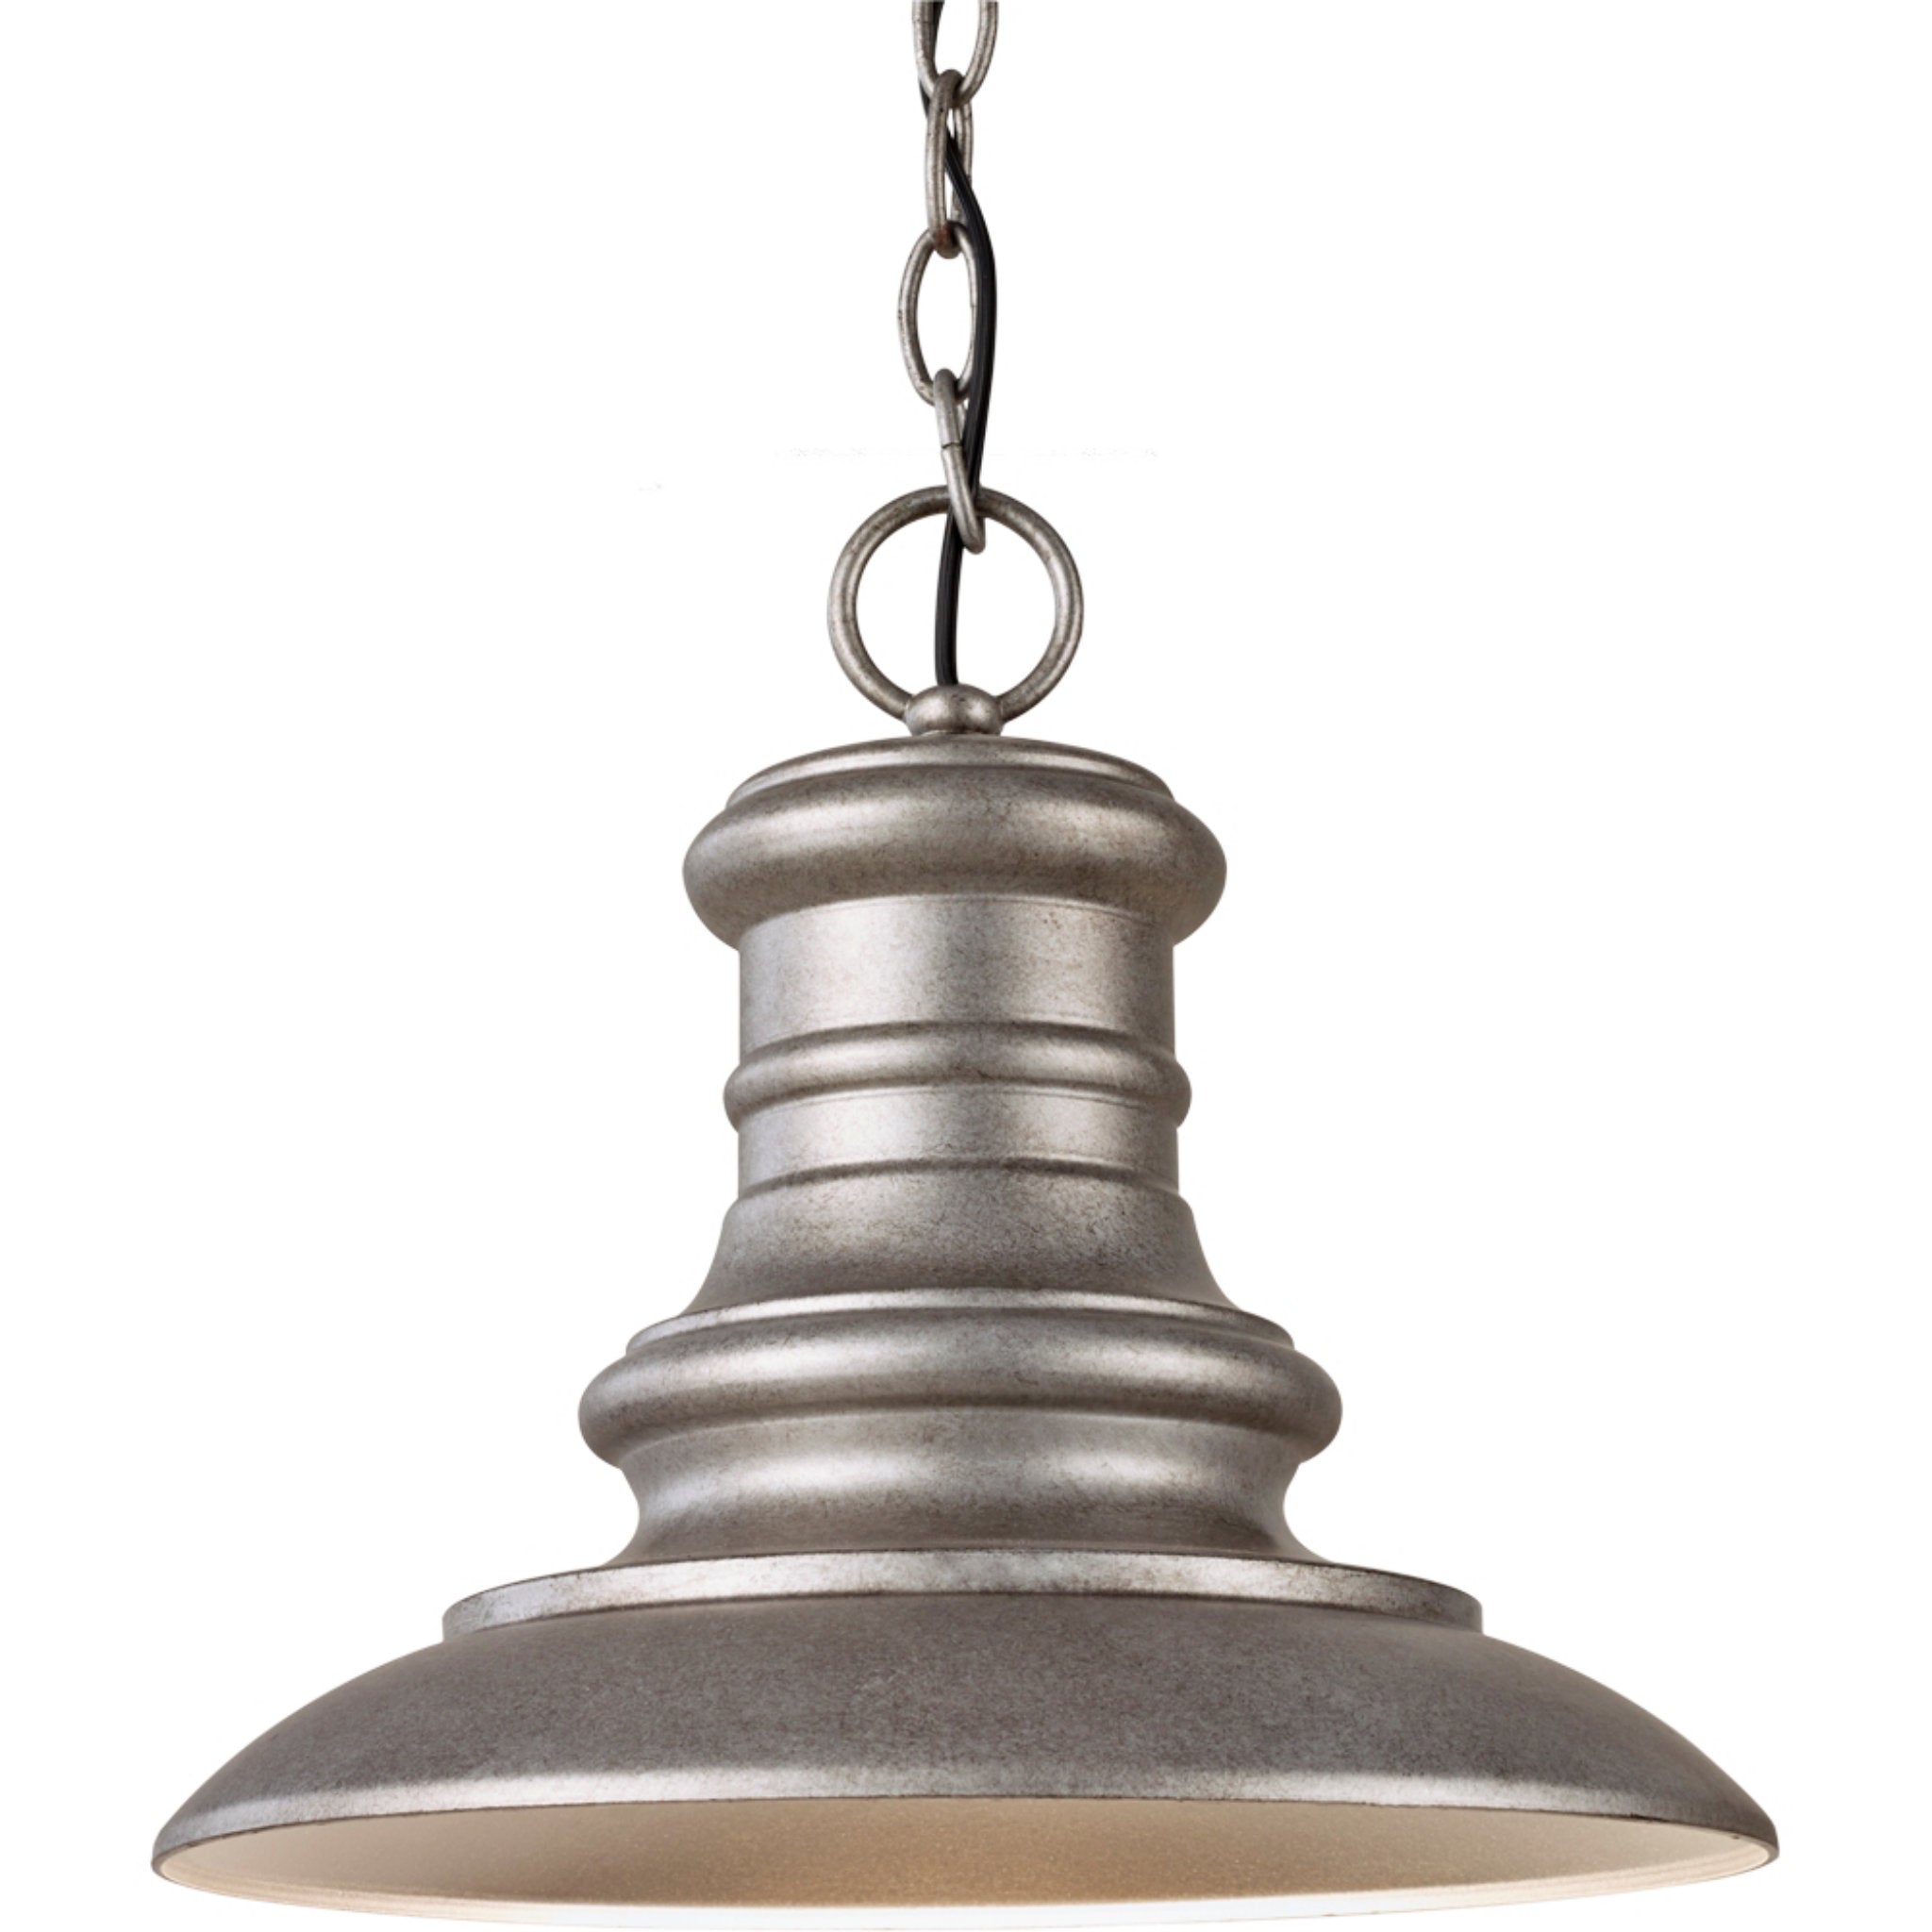 Redding Station Pendant Period Inspired Outdoor Fixture Dark Sky 10.875" Height Aluminum in Tarnished Silver